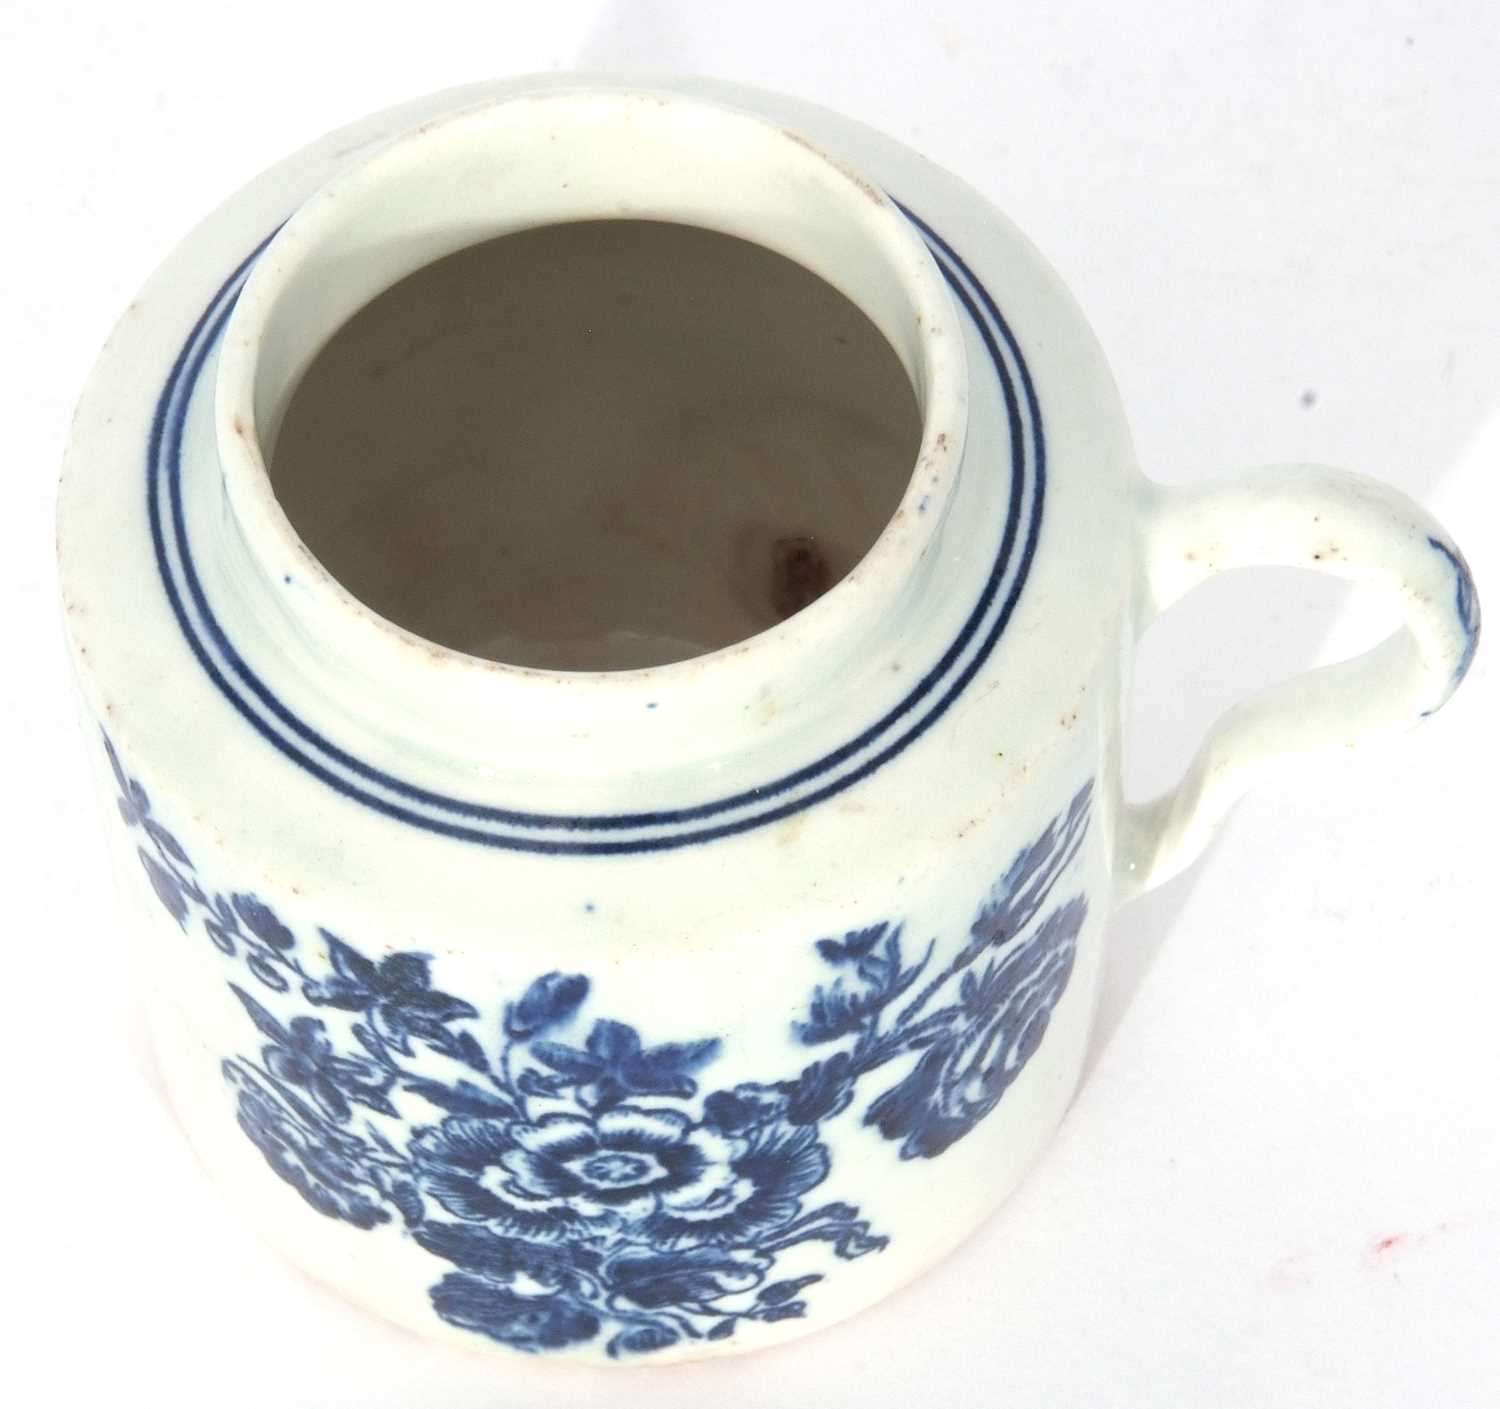 Rare Lowestoft Porcelain Mustard Pot c.1775 with ear shaped handle decorated with a Worcester - Image 8 of 8